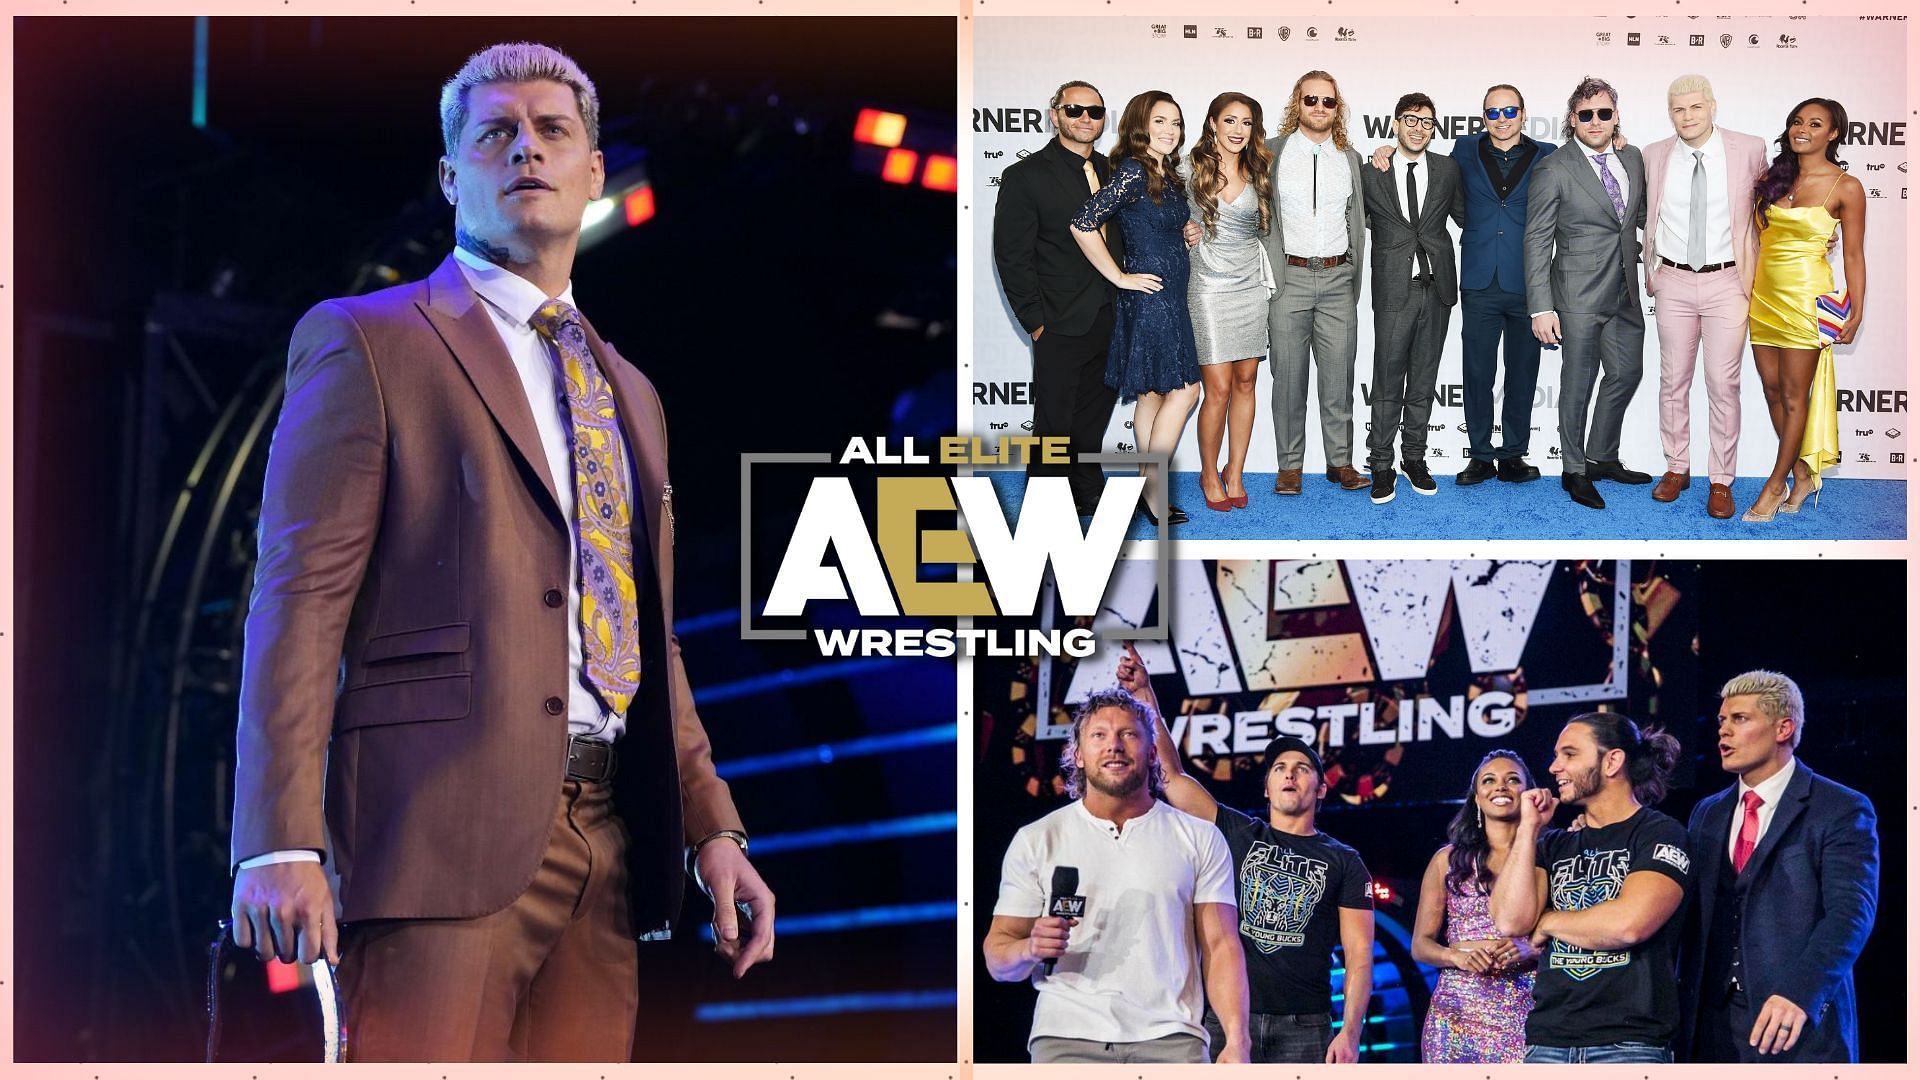 A top AEW star says he was a bigger name than Cody Rhodes and the reason the company took off.